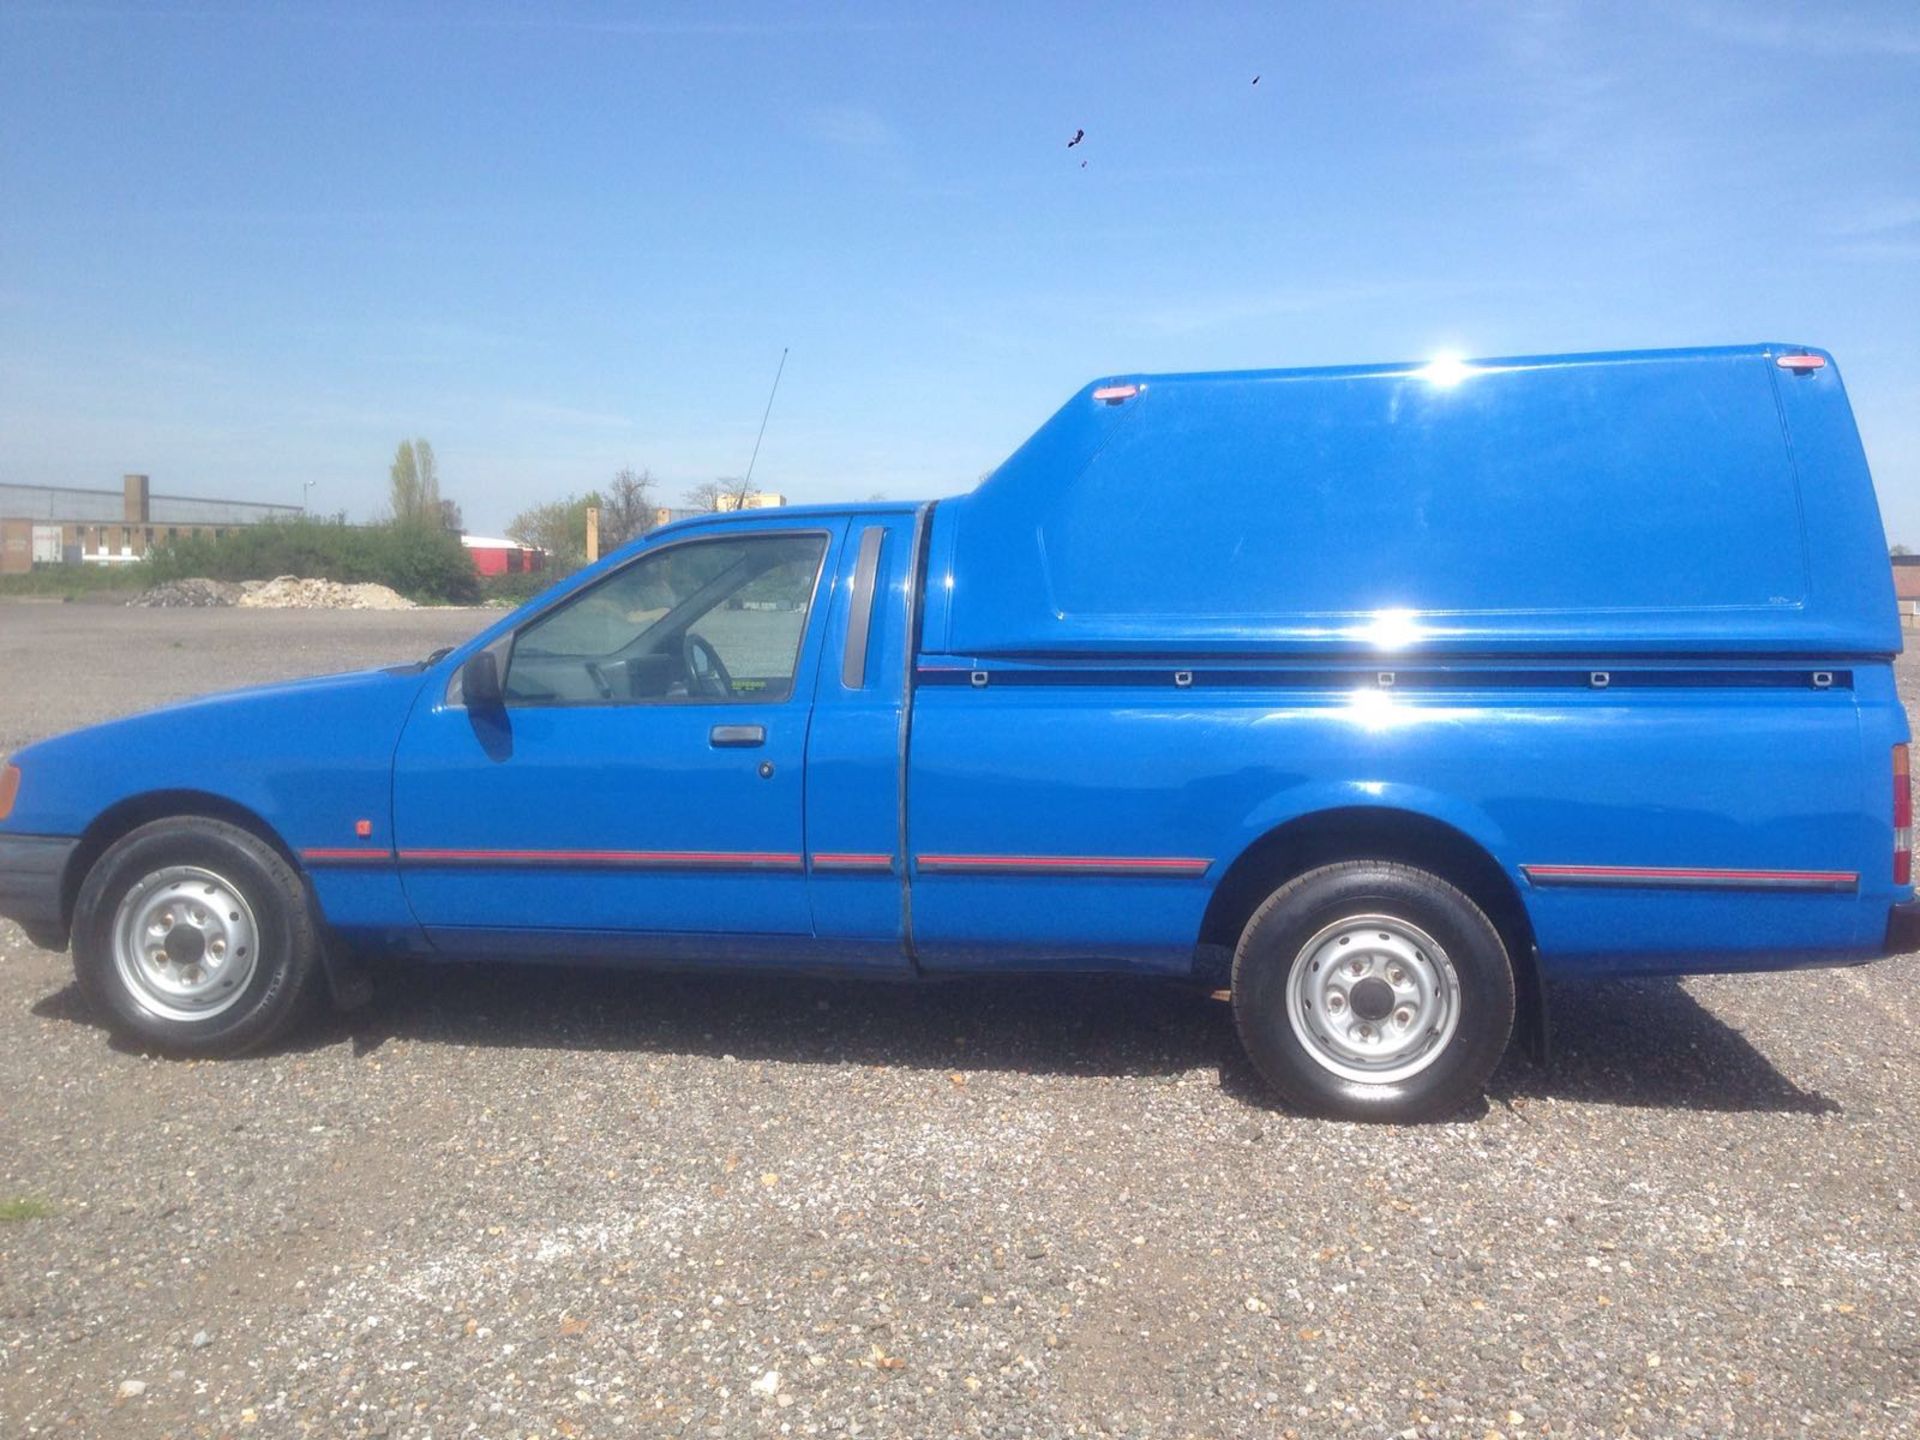 Ford P100 pickup, 1.8 turbo diesel 1991/J 39,000 miles with truckman top 2 owners - Image 9 of 14